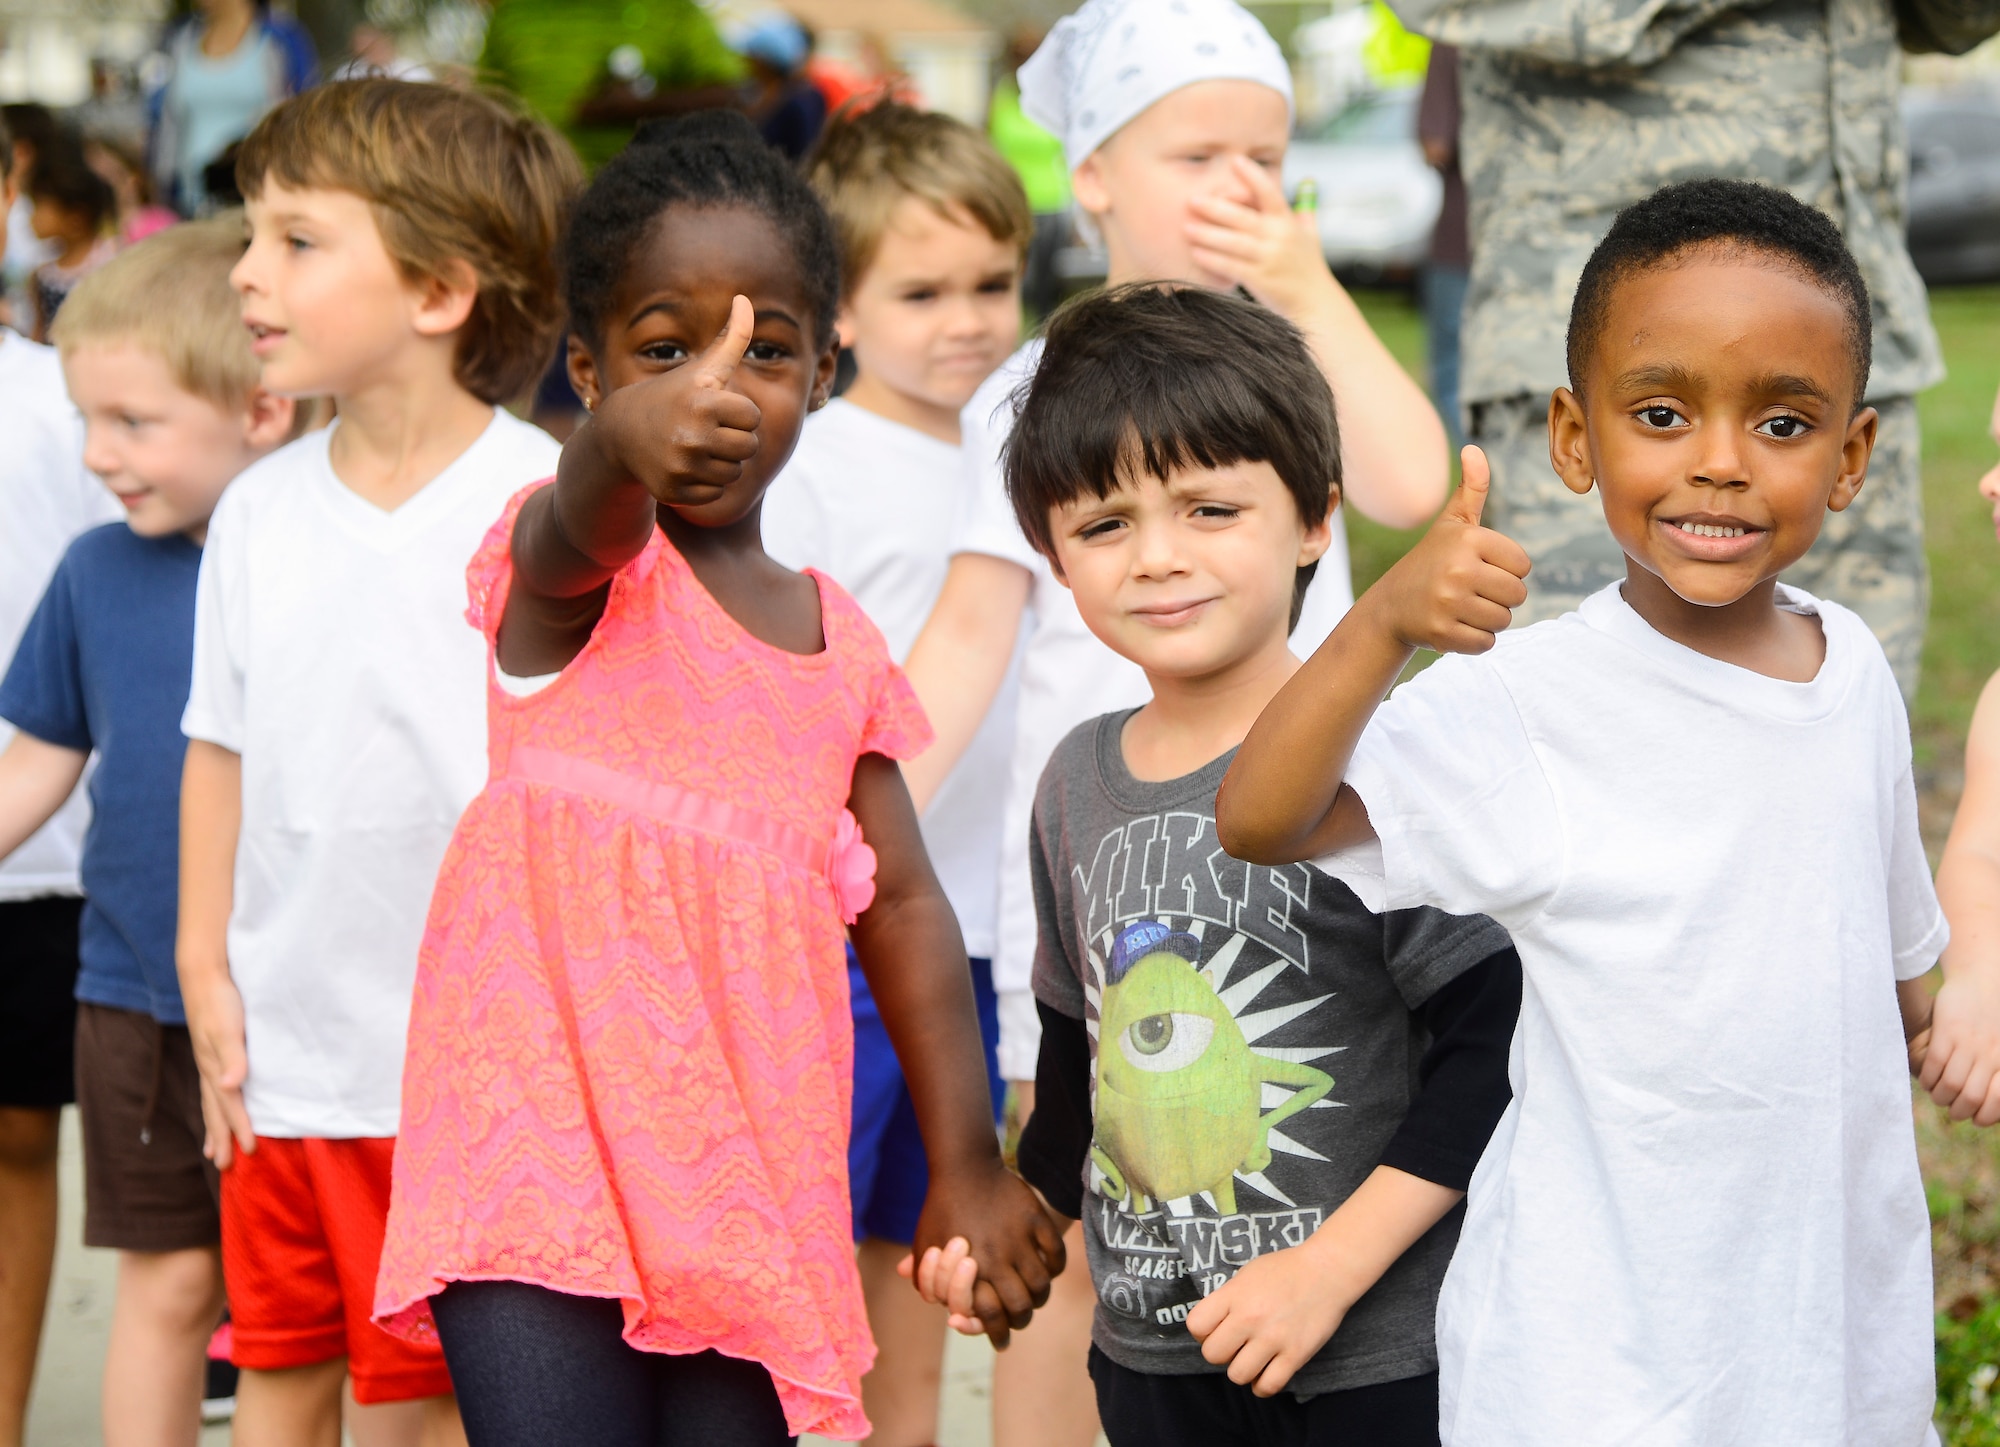 Children from the Child Development Center (CDC) at MacDill Air Force Base, Fla., give a thumbs up prior to participating in the first ever CDC Color Run, April 1, 2016. April is Month of the Military Child, which recognizes the challenges and sacrifices that military children make as their parents serve. (U.S. Air Force photo by Staff Sgt. Melanie Hutto)